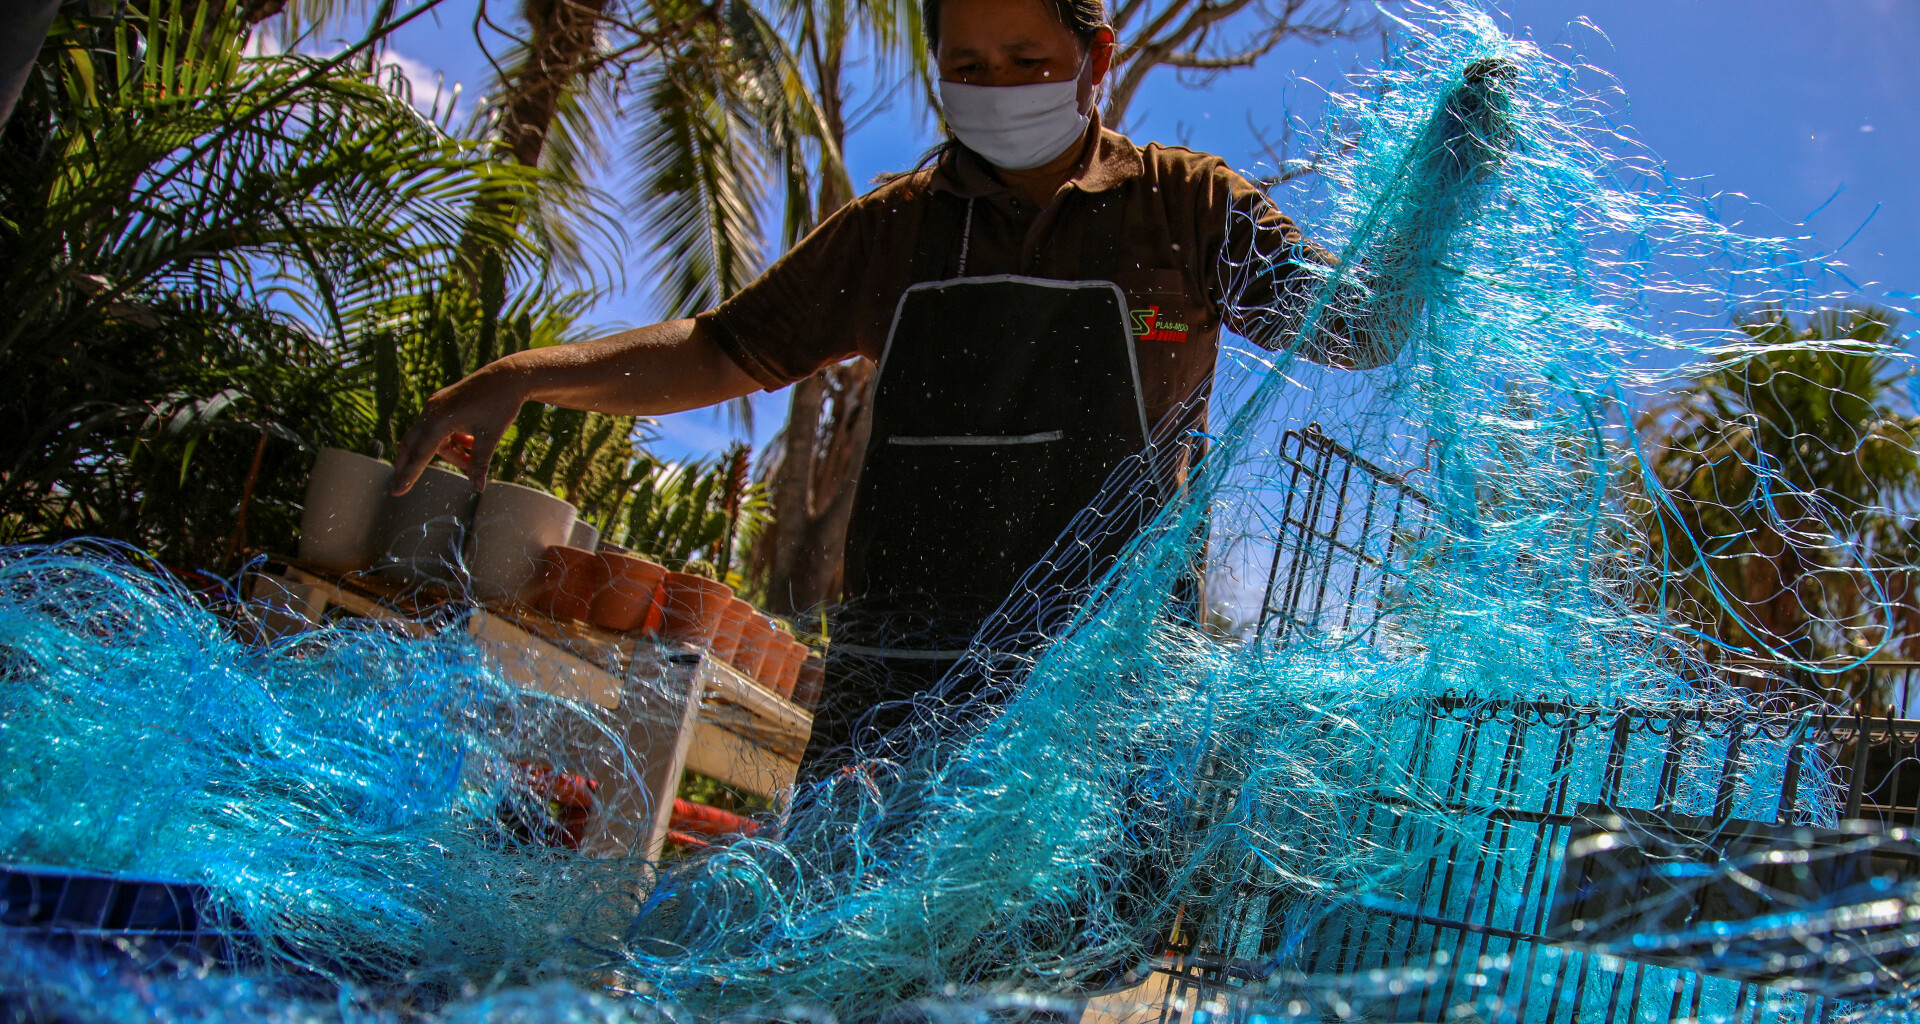 Net gains: Thai project turns fishing nets into virus protection gear